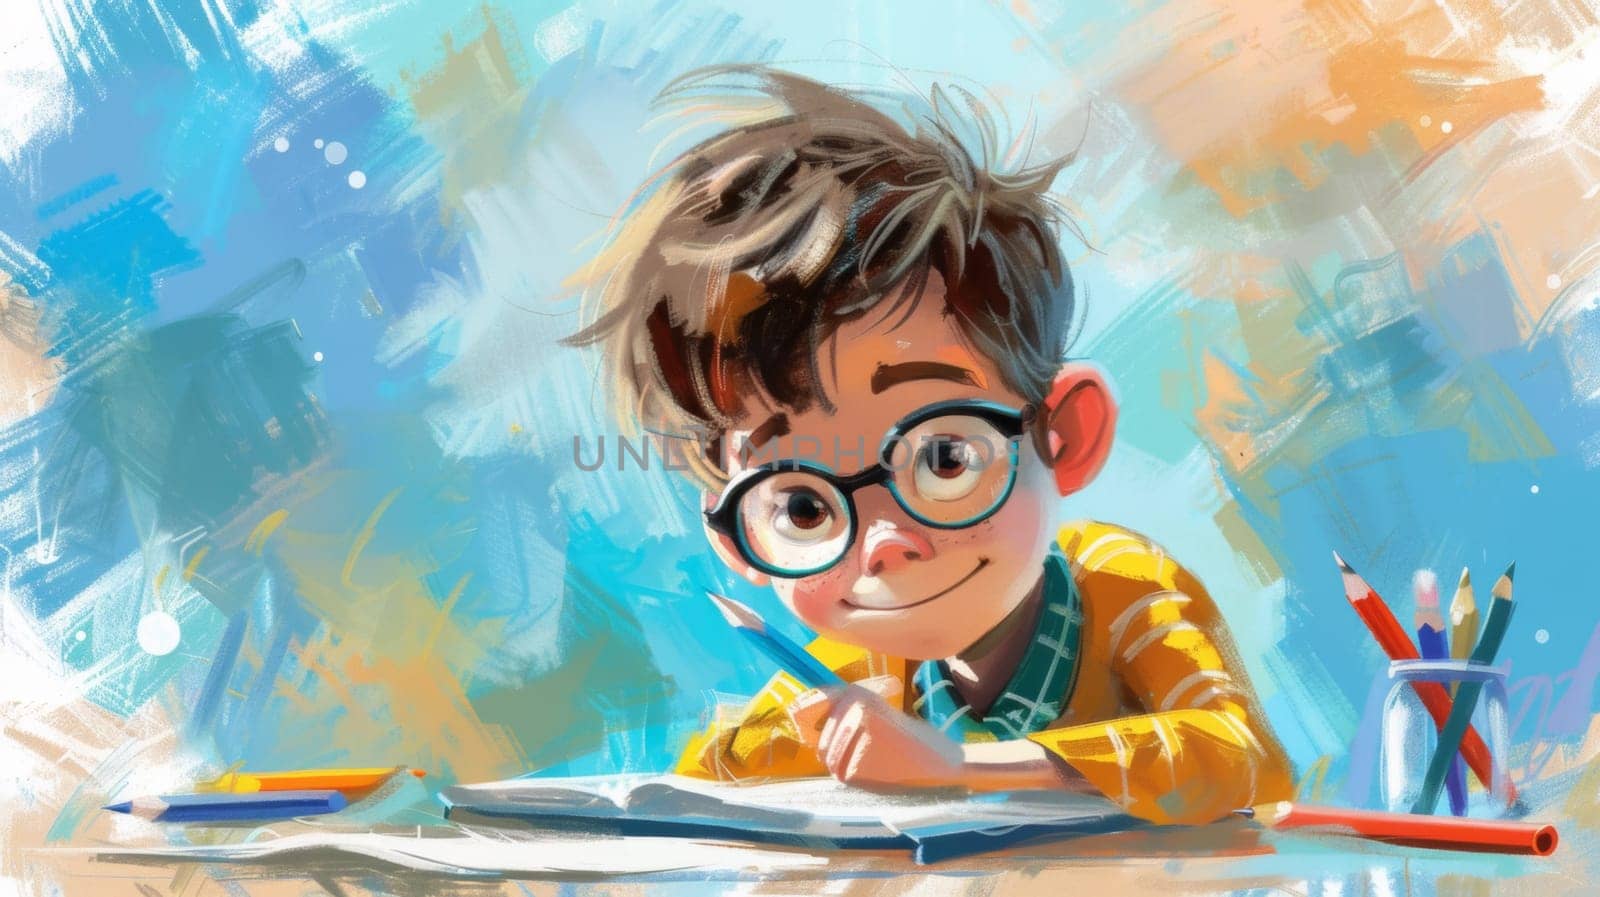 A young boy with glasses writing in a notebook